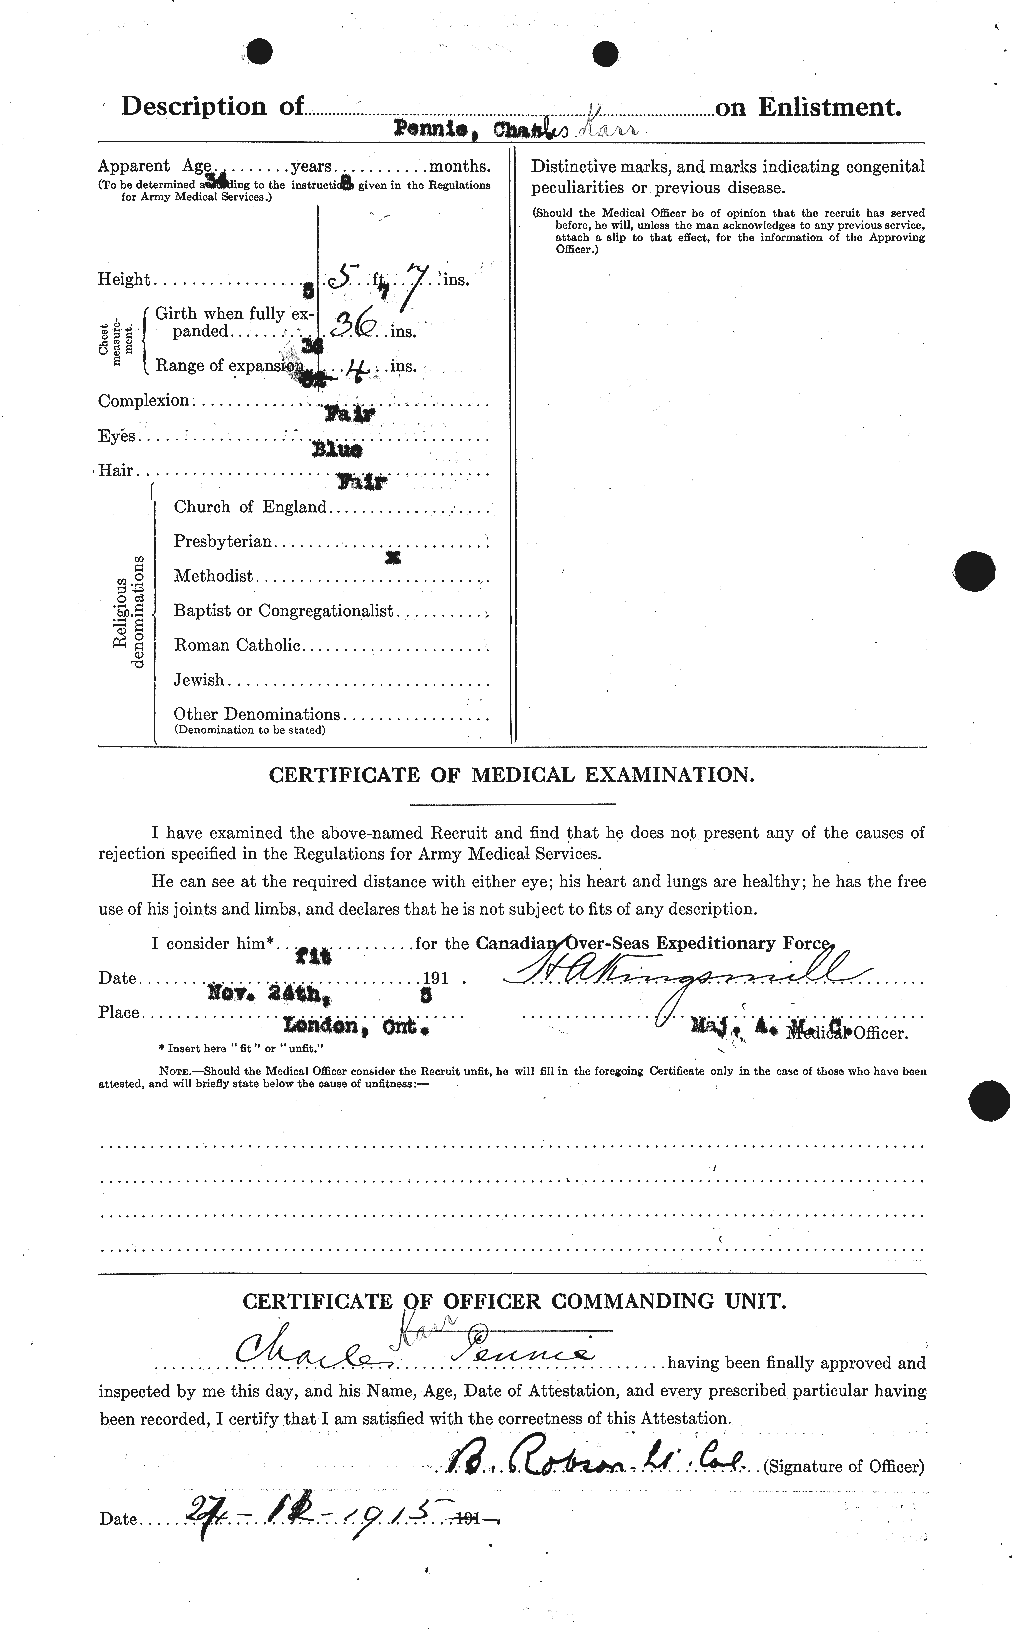 Personnel Records of the First World War - CEF 573187b